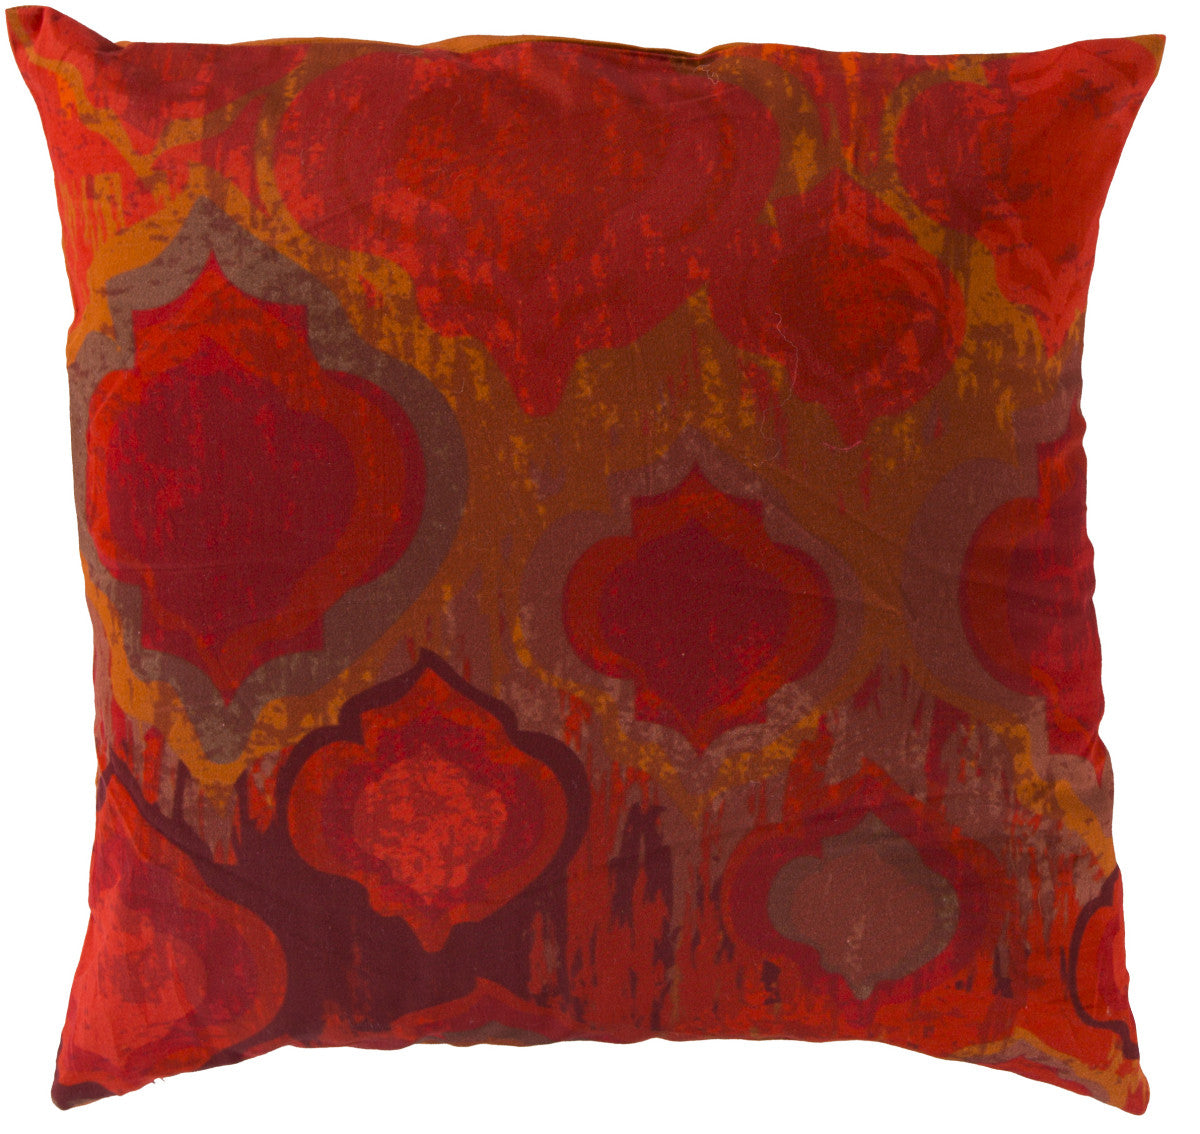 Surya Watercolor Exquisite in Ikat SY-032 Pillow